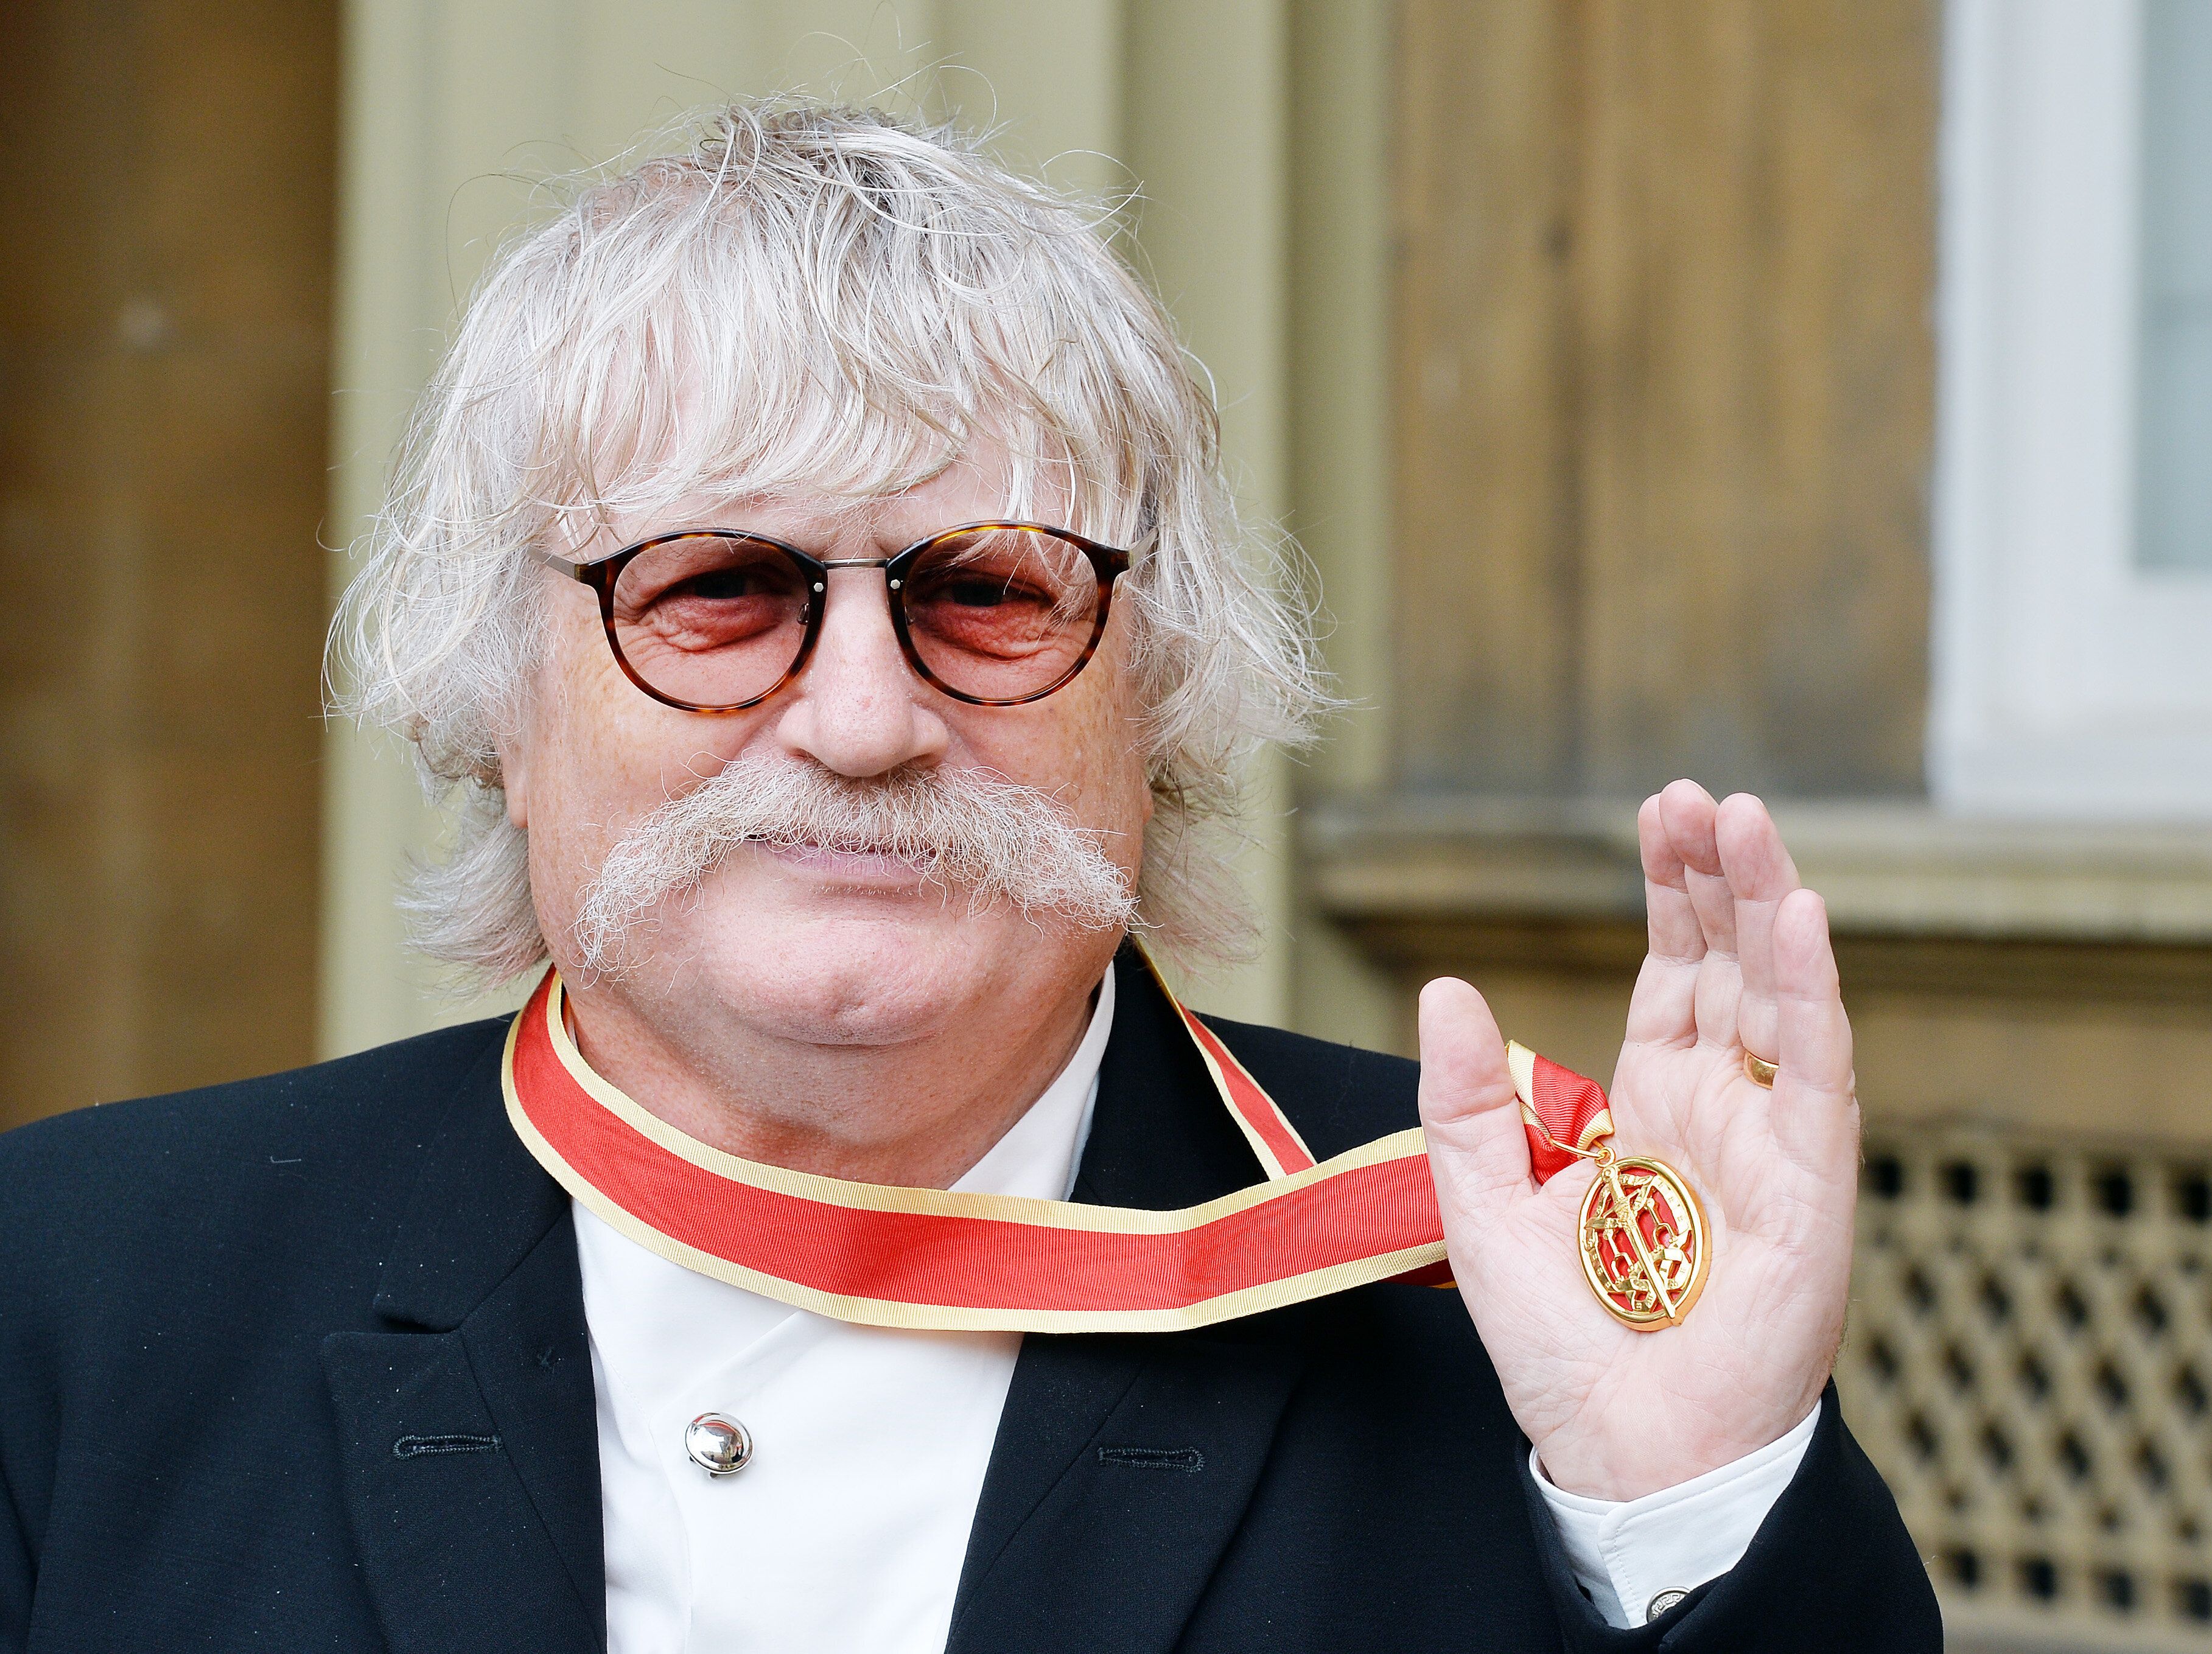 Sir Karl Jenkins holds his Insignia of Knighthood award after it was presented at Buckingham Palace on Oct. 6, 2015.